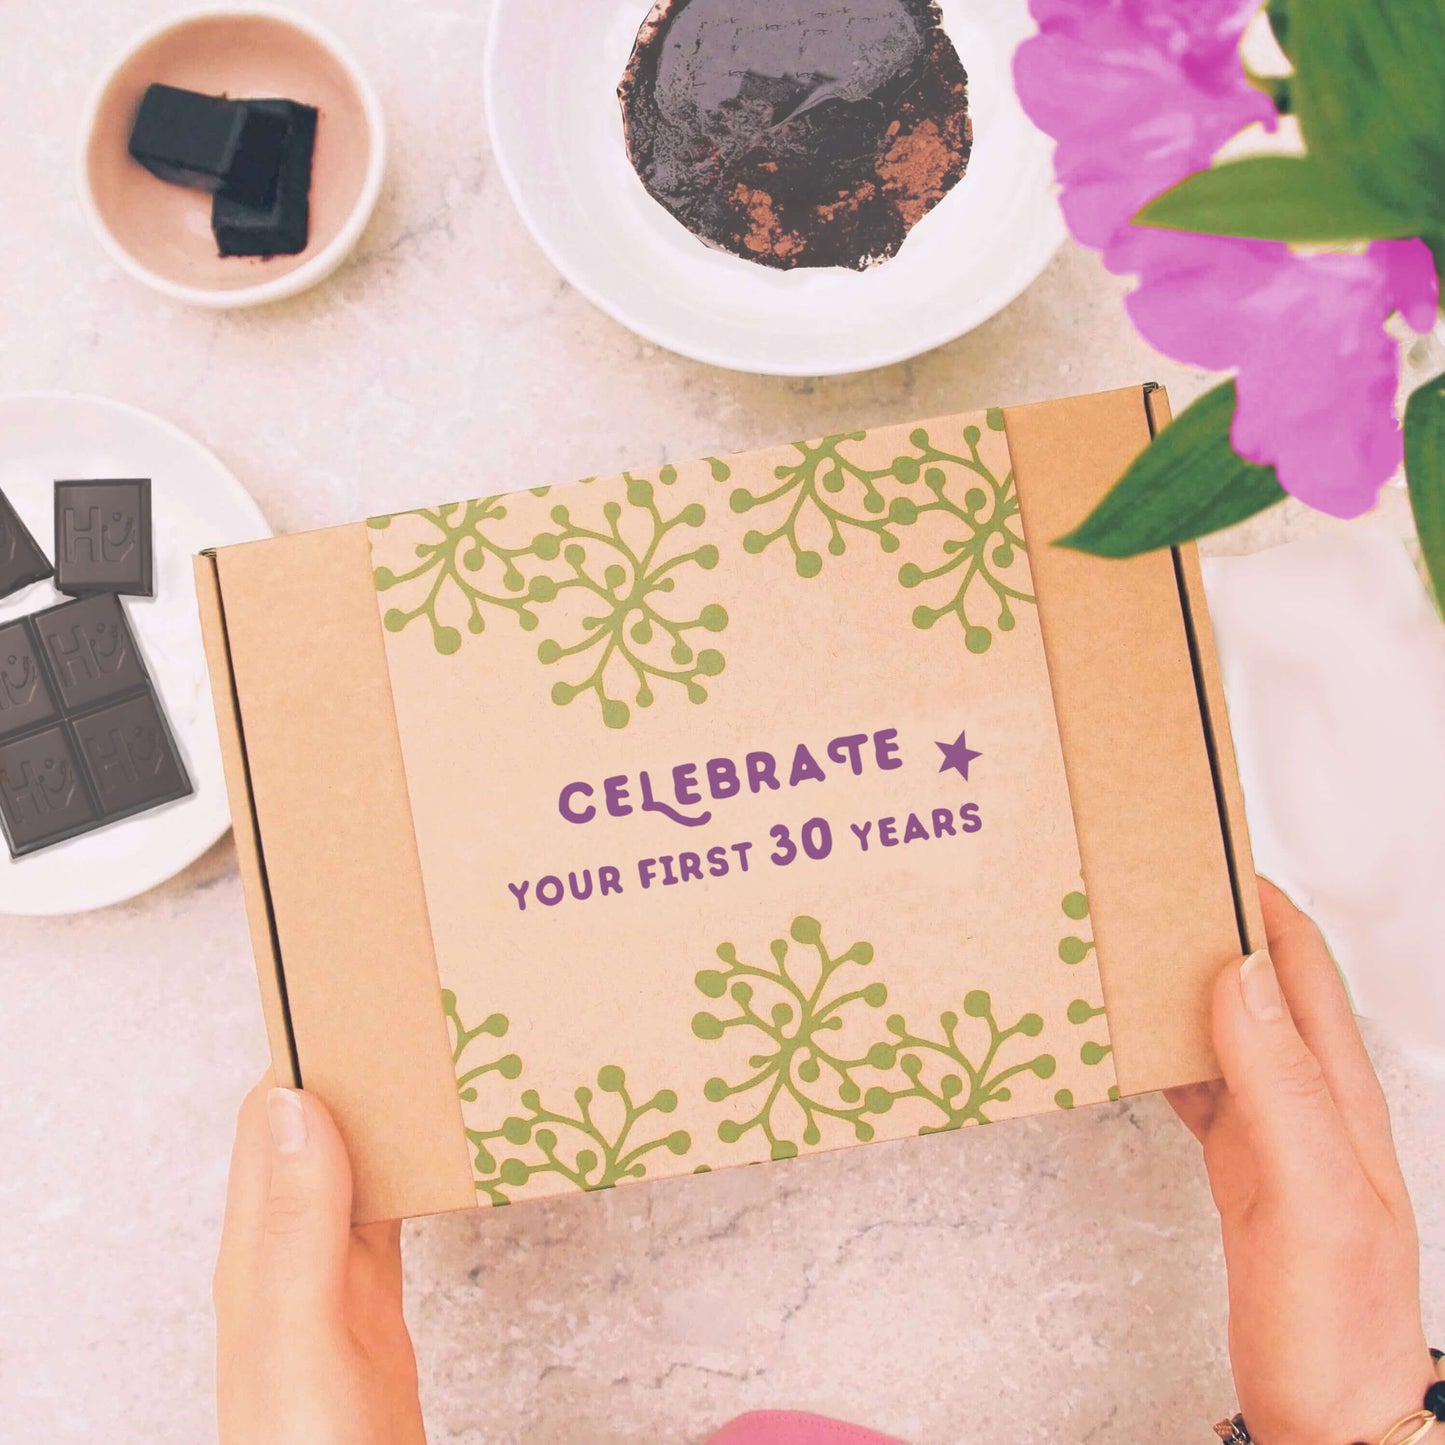 30th birthday gift with gift message 'celebrate your first 30 years'